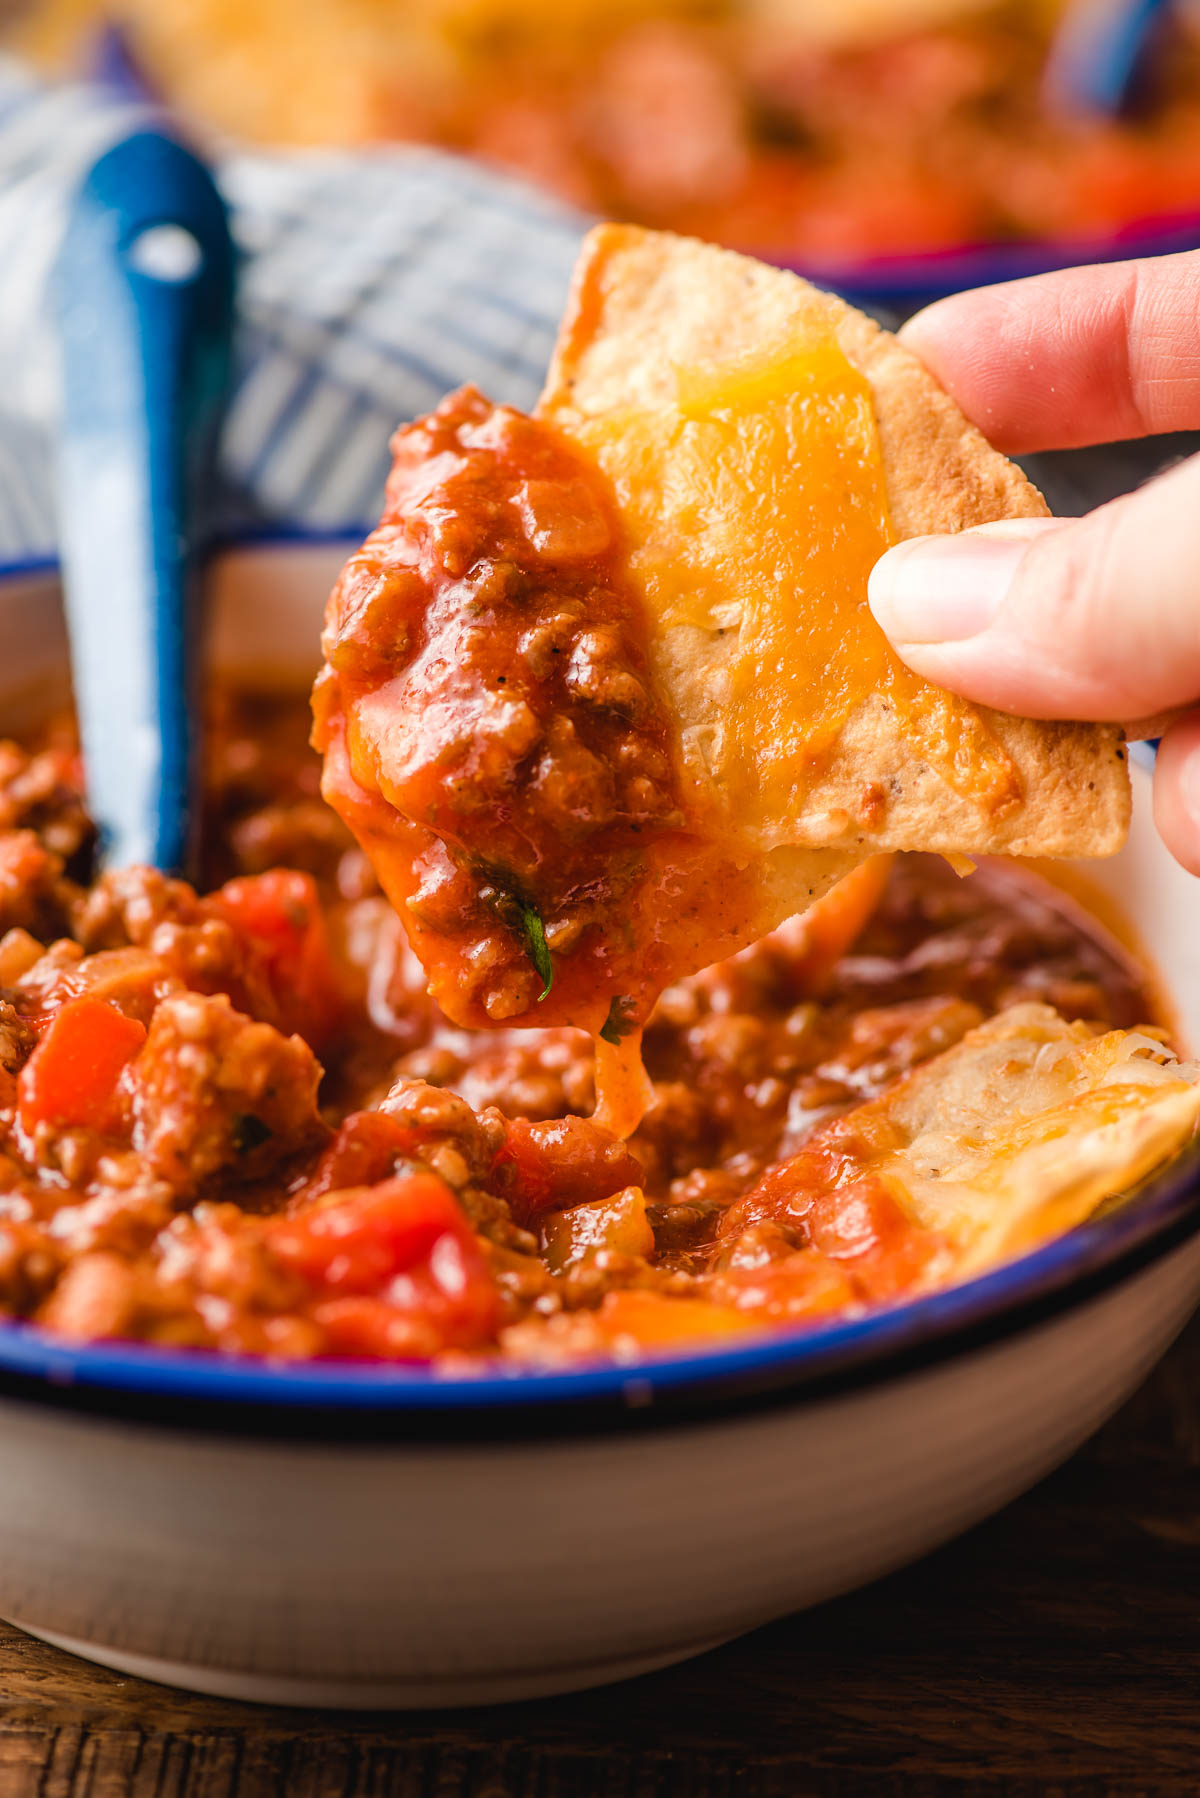 A cheesy tortilla chip dips from a bowl of Italian Sausage Chili.